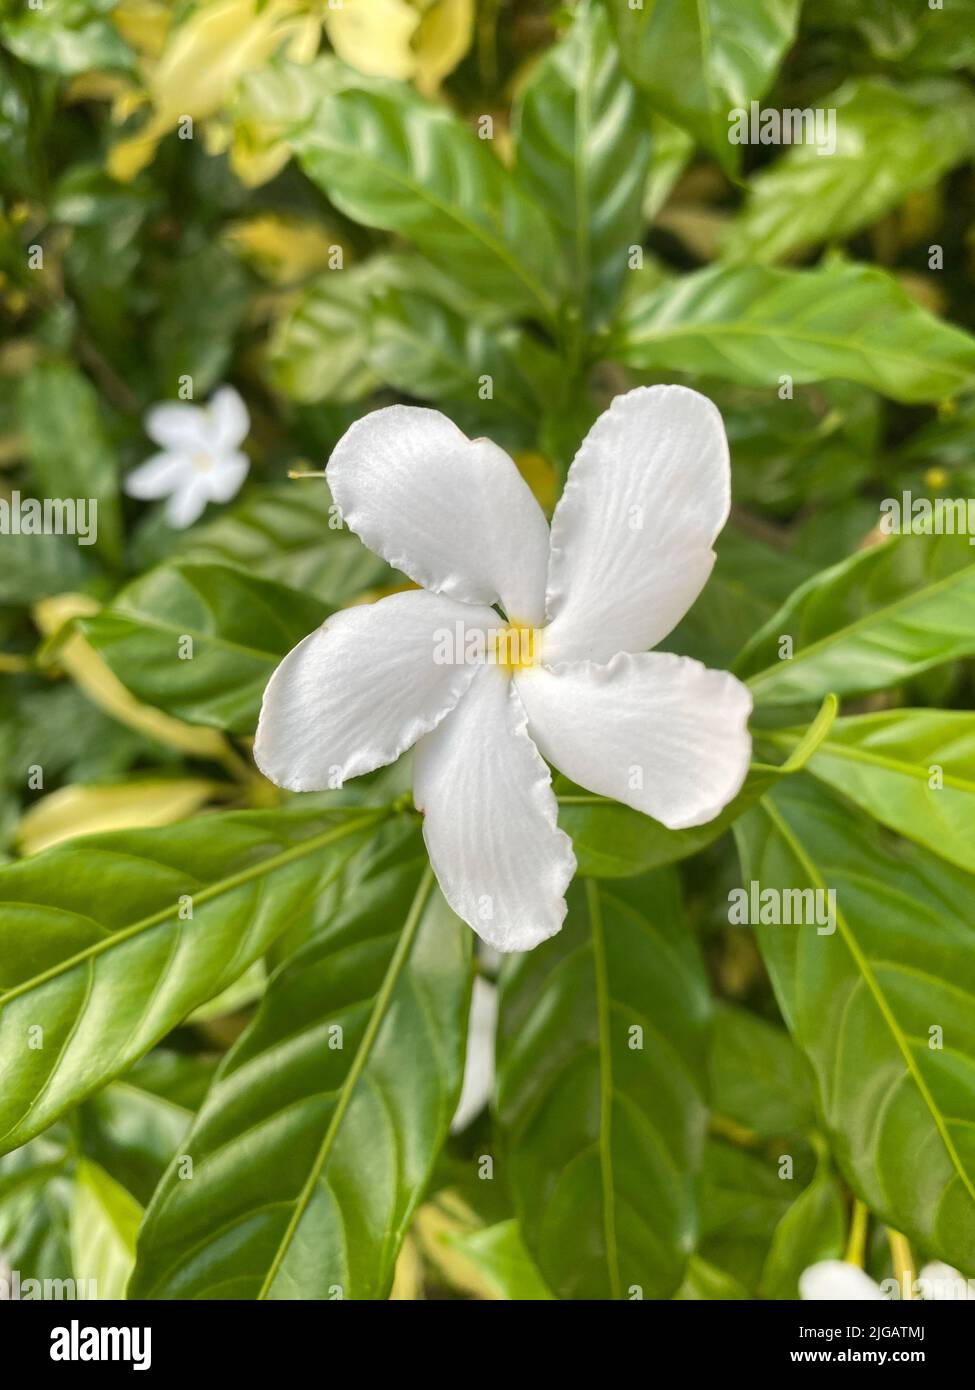 A vertical shot of a white pinwheelflower with green leaves in a blurred background Stock Photo